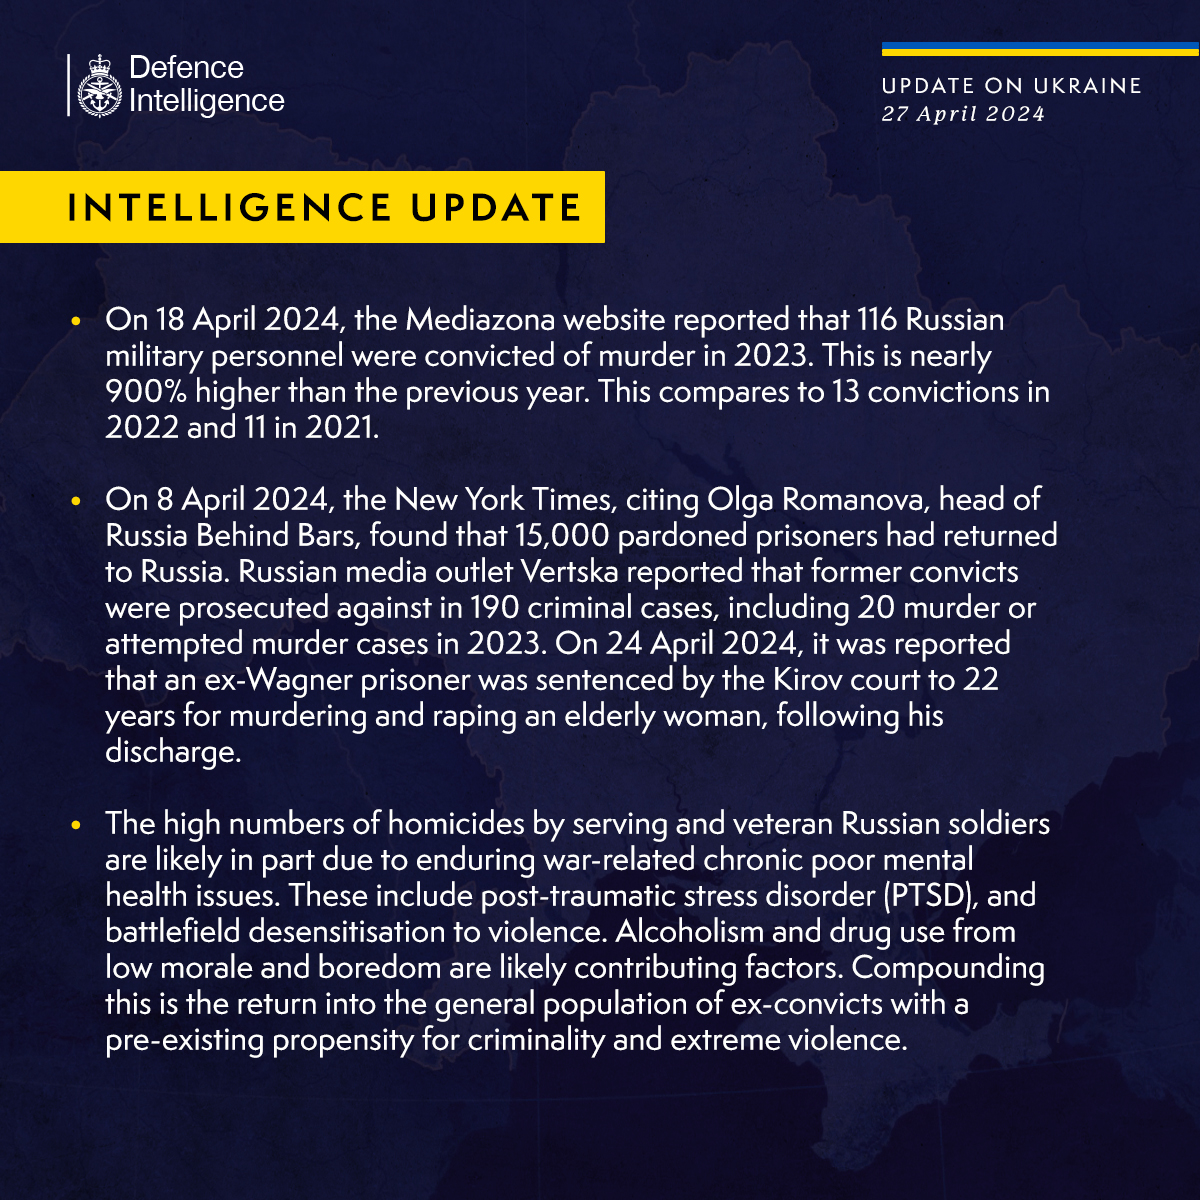 Latest Defence Intelligence update on the situation in Ukraine – 27 April 2024. Find out more about Defence Intelligence's use of language: ow.ly/CN5850RpV2a #StandWithUkraine 🇺🇦